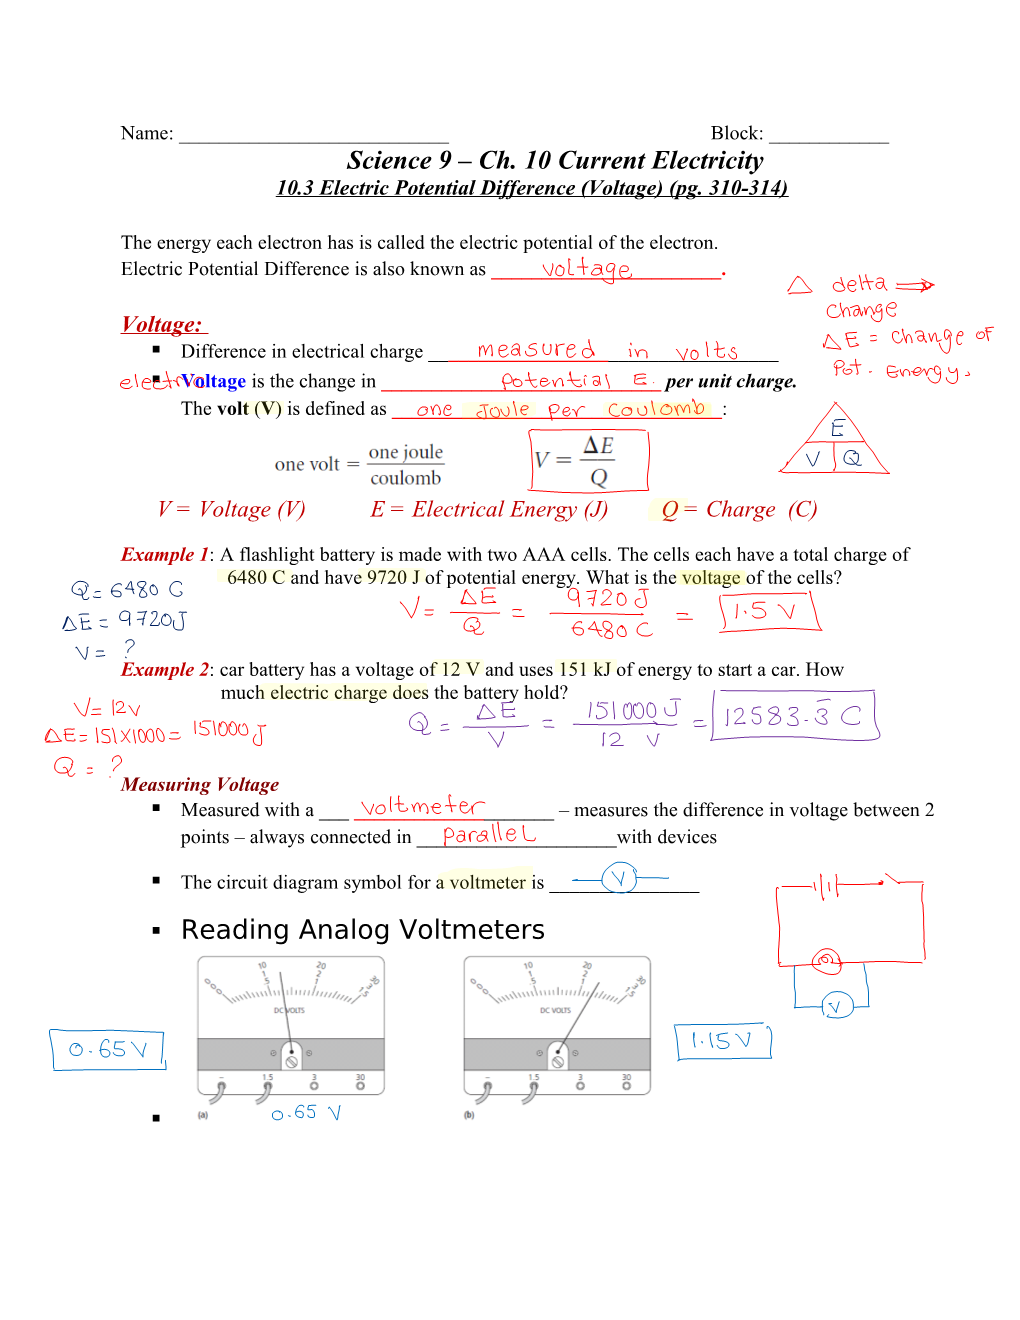 10.3 Electric Potential Difference (Voltage) (Pg. 310-314)